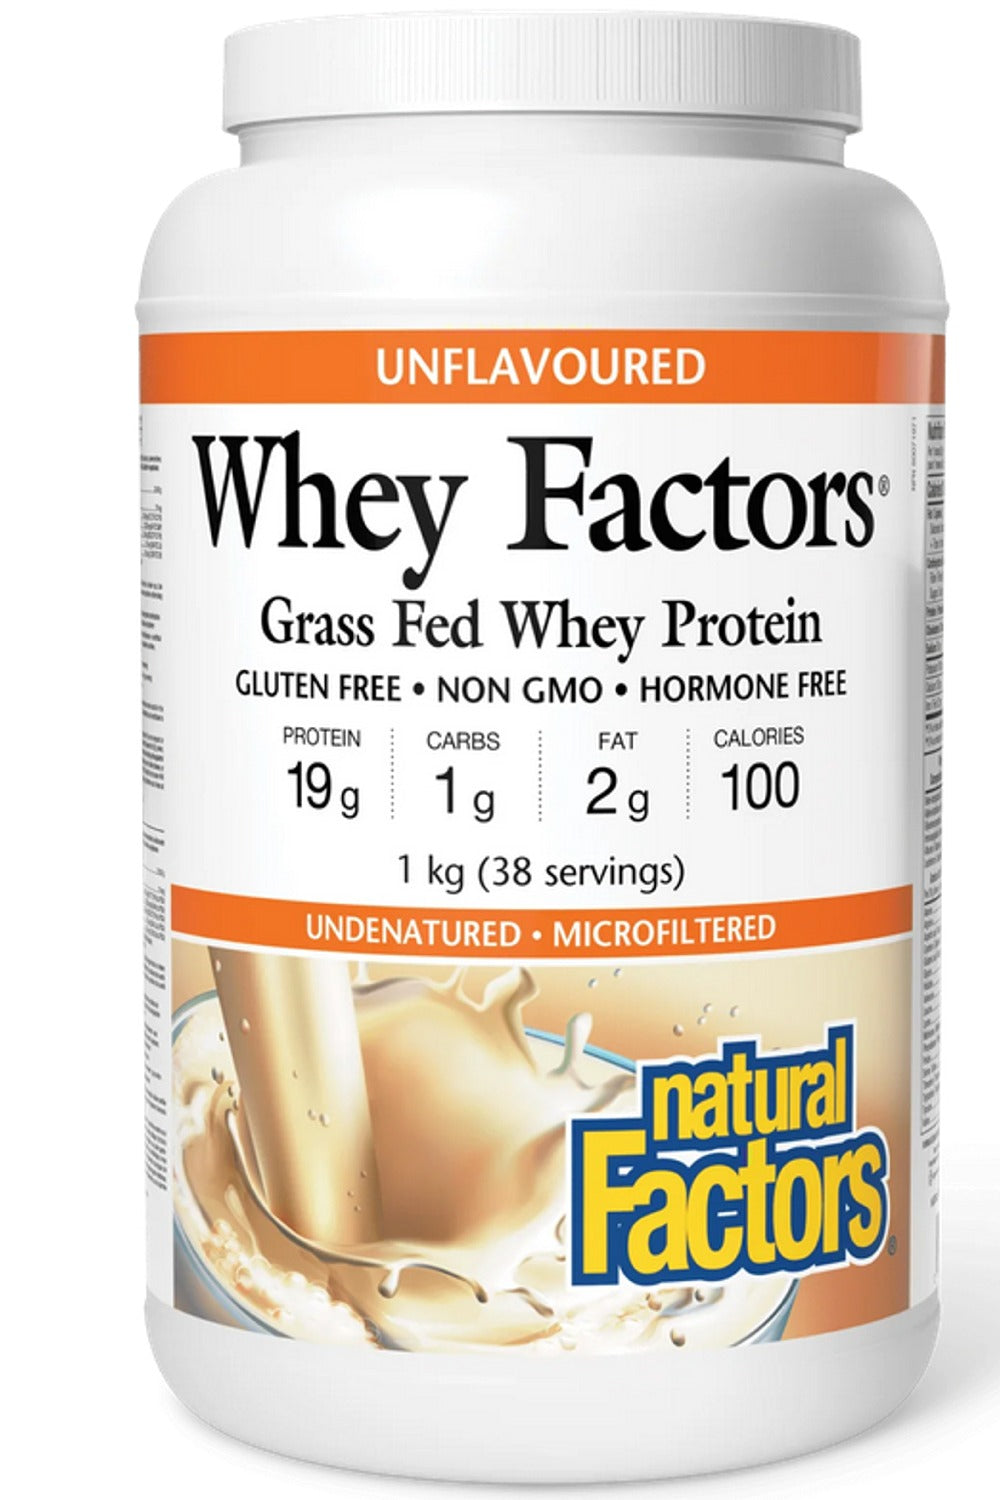 NATURAL FACTORS Grass Fed Whey Protein (Unflavoured - 38 Servings)